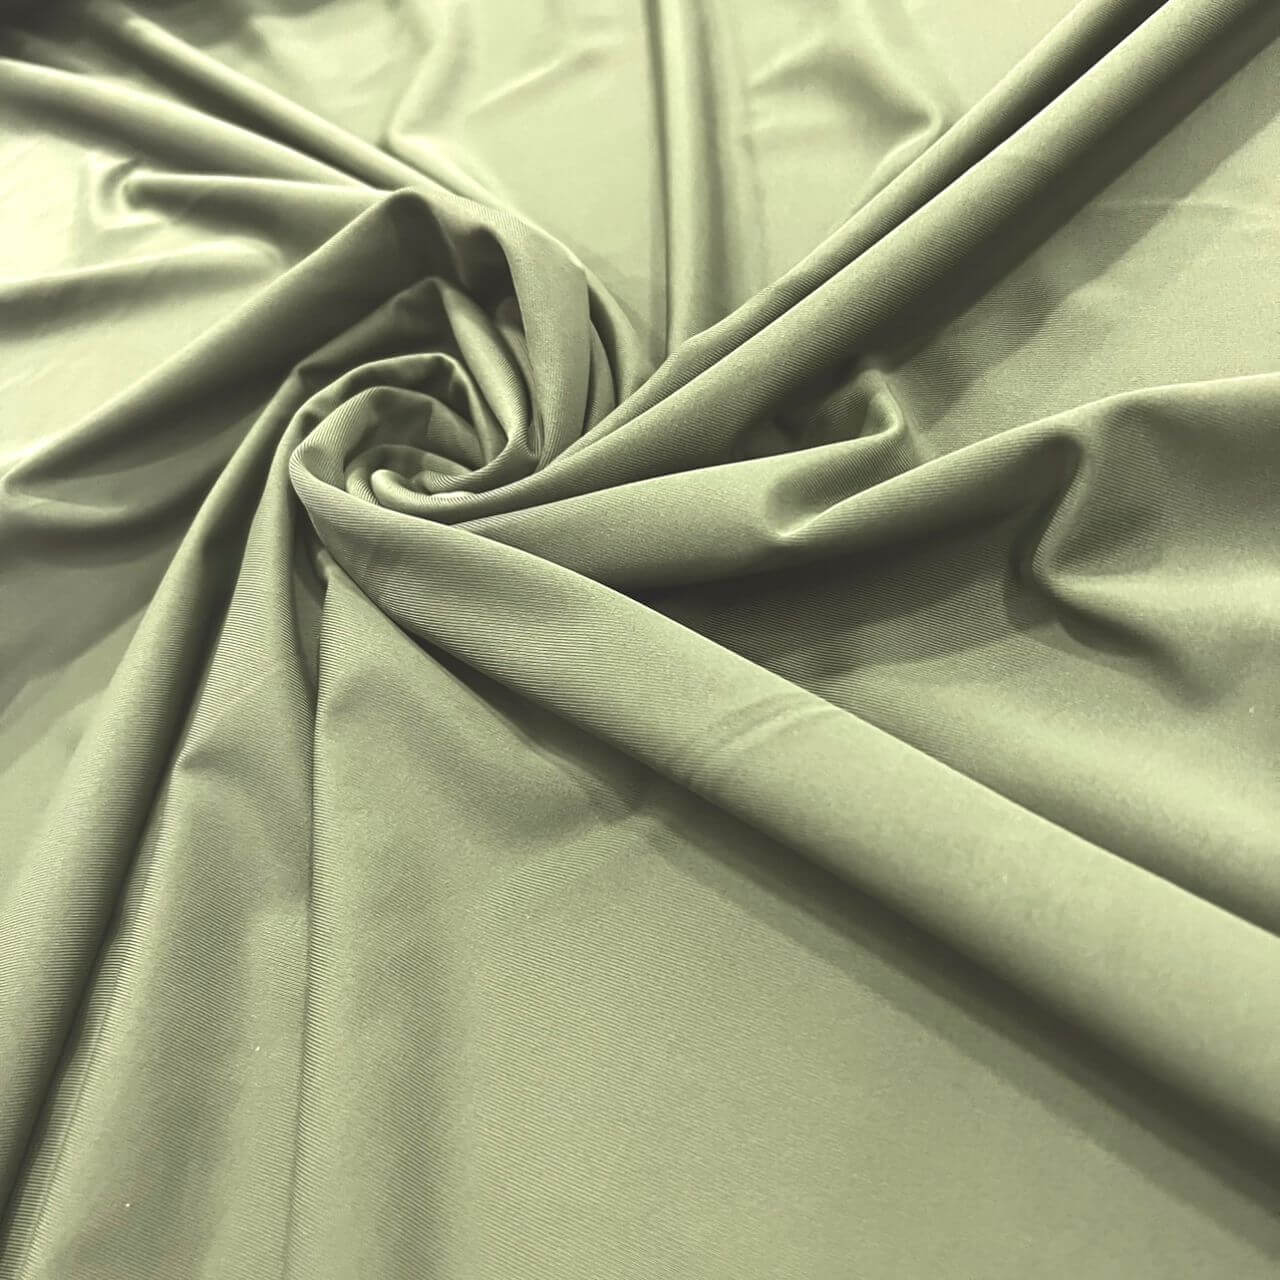 ♻️Poly Recycle Solid Light Olive Green Matte Finish Polyester Spandex  Fabric 4 Way Stretch By Yard for Swimwear (243-10) Spandex Fabric